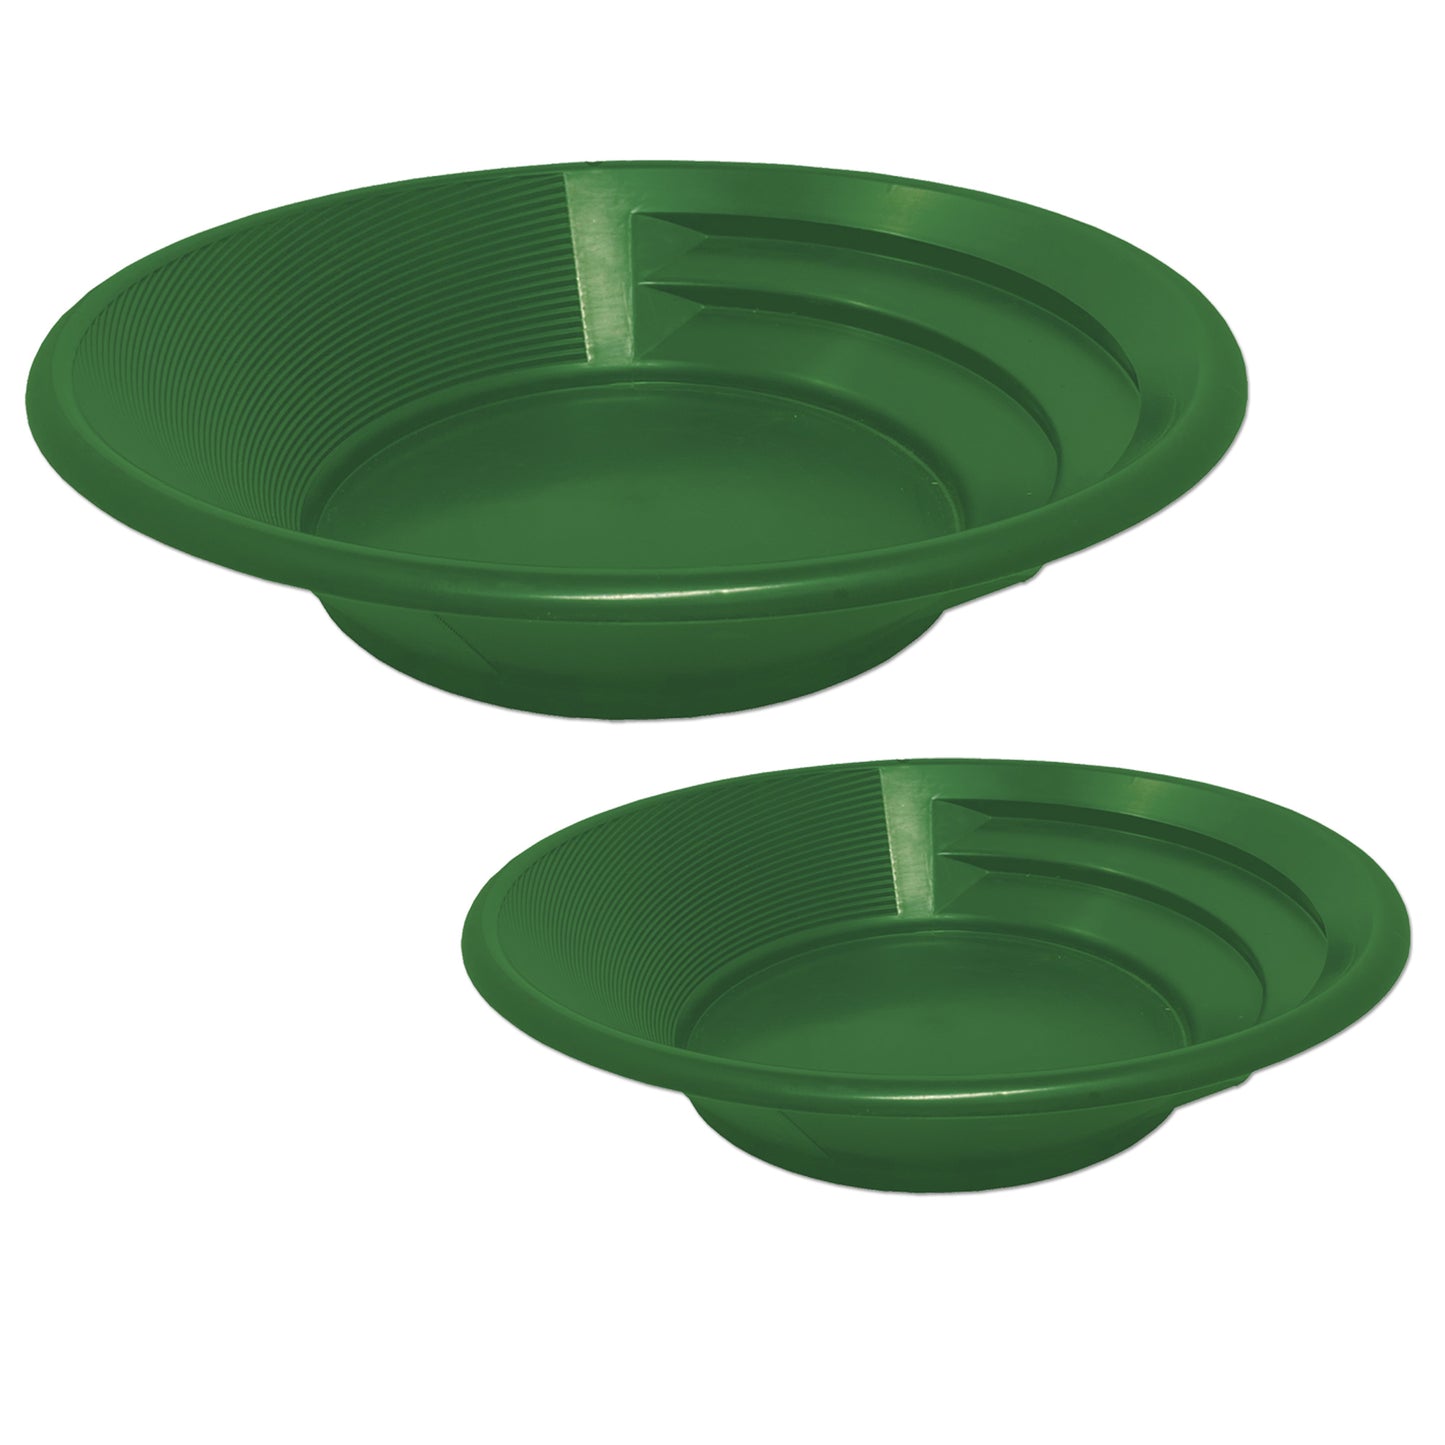 Set of 2 Large Nesting Gold Pans in 11 inch and 15 inch diameter; Sluice Fox patented spiral riffle gold pan; dual riffle spiral gold pans; plato para buscar oro